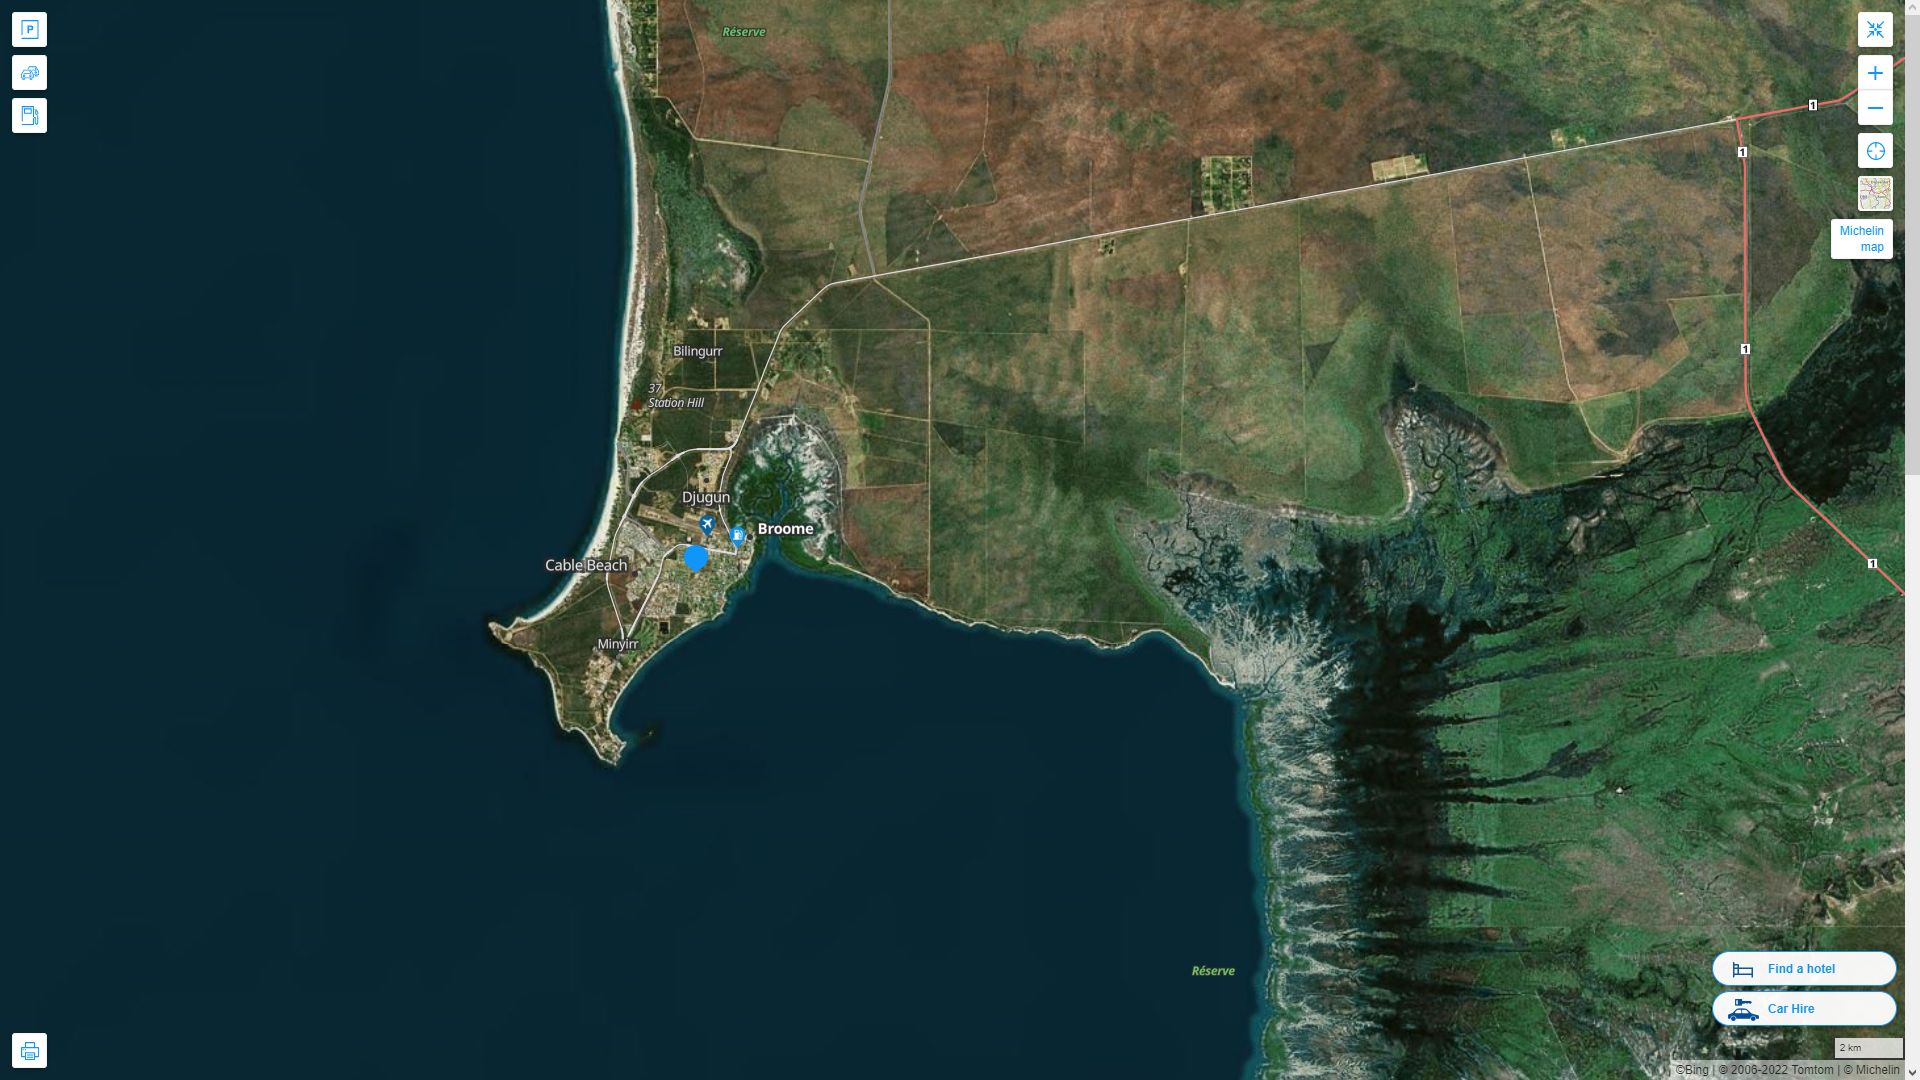 Broome Highway and Road Map with Satellite View